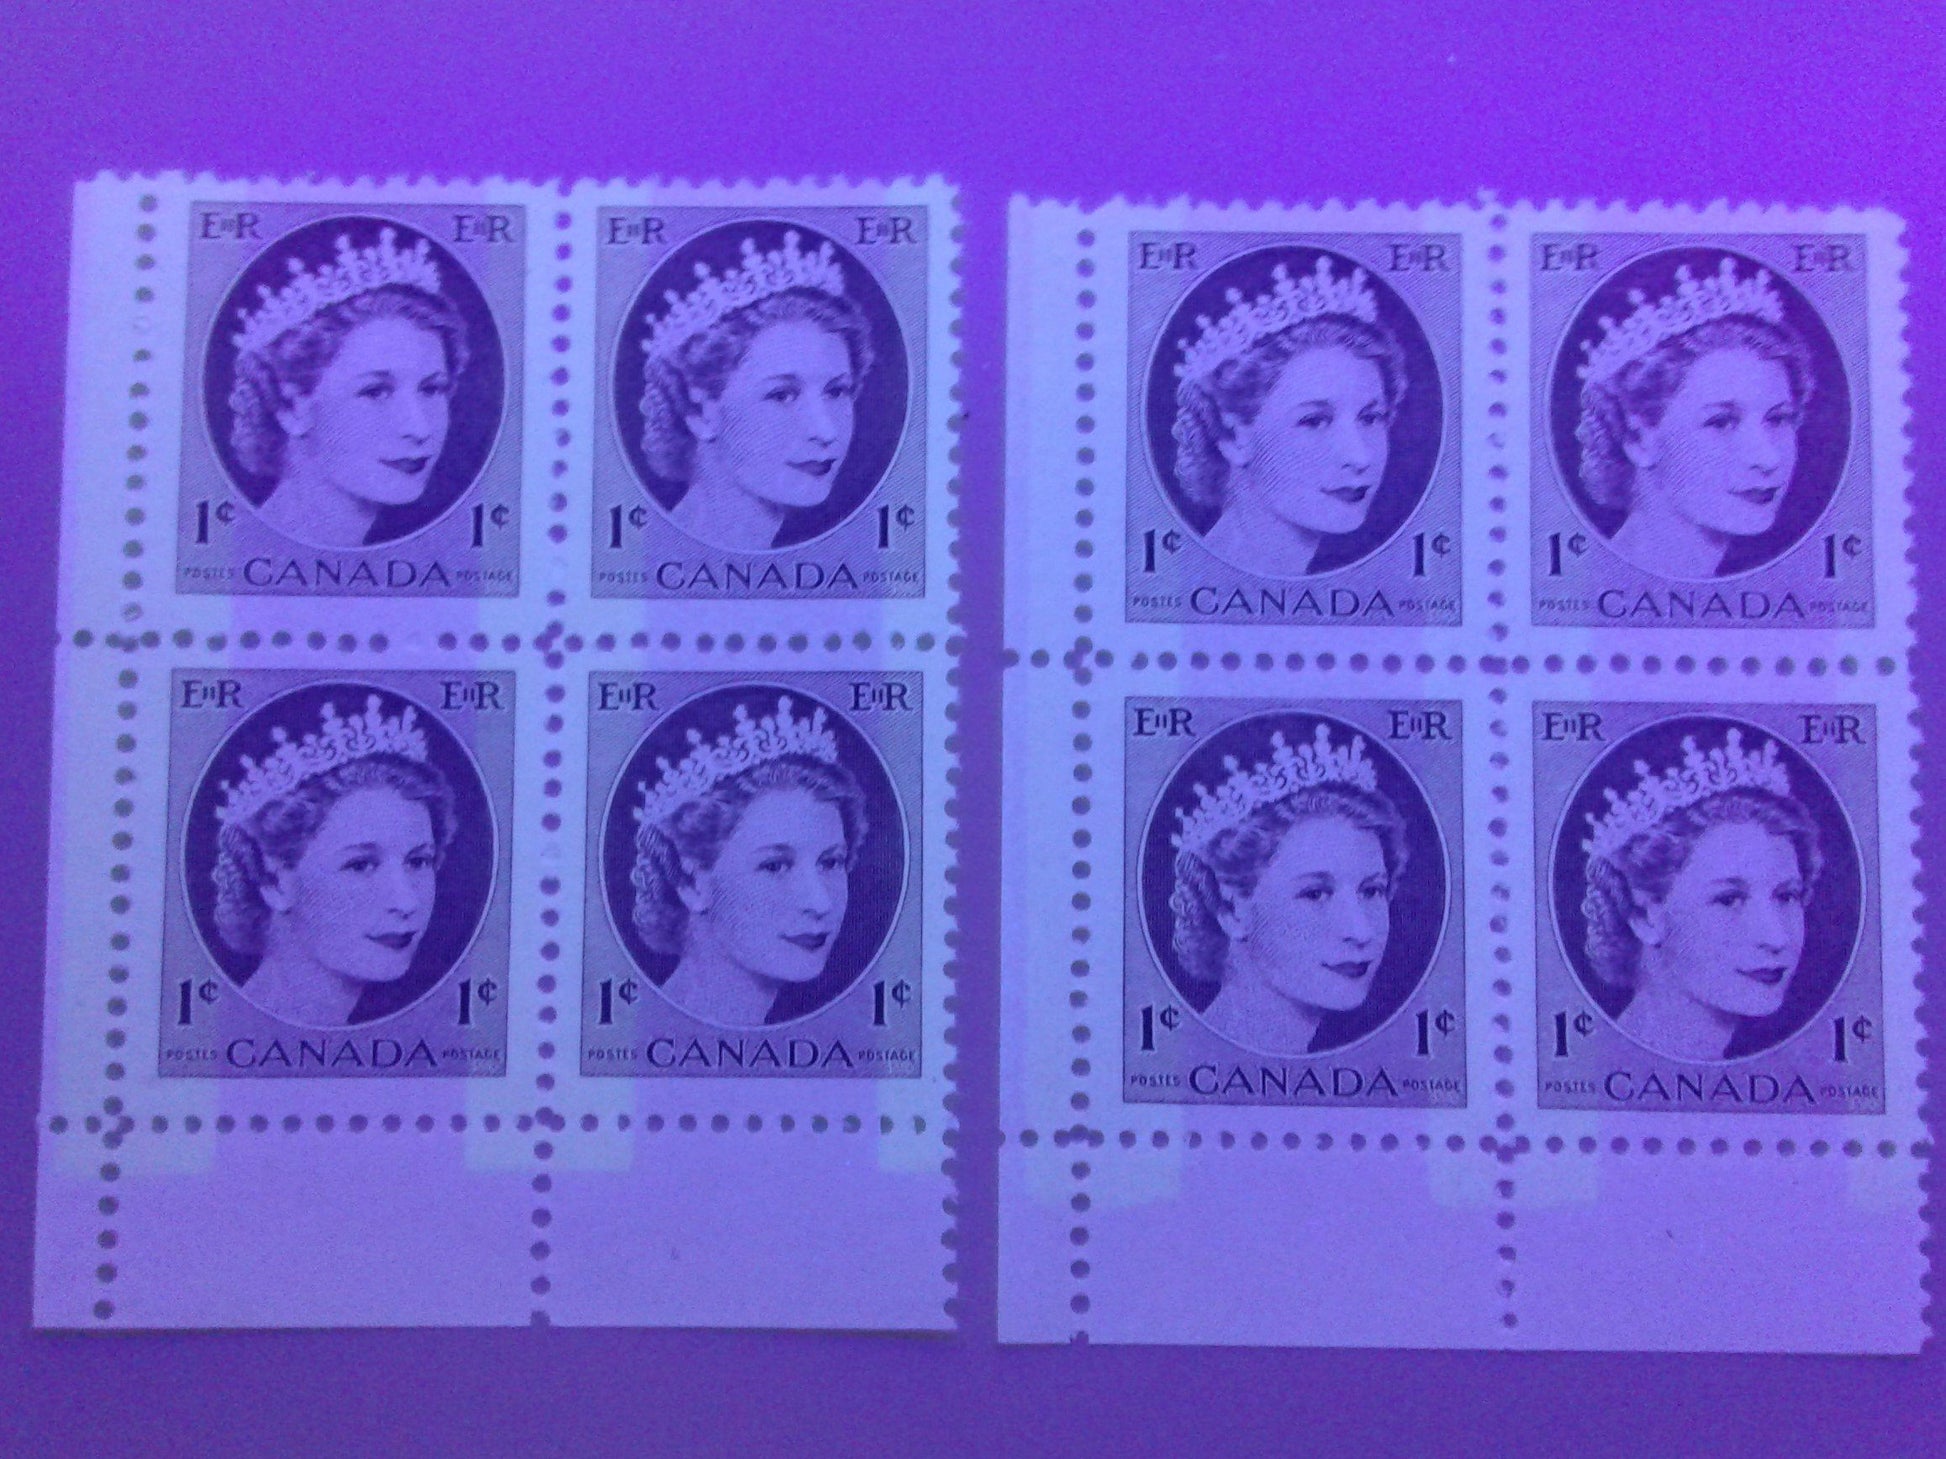 Canada #337p 1c Chocolate Queen Elizabeth II, 1954-1962 Wilding Issue, Lower Left Blank Winnipeg Tagged Blocks of 4, Two Different, Various Perfs. , NF Br Vertically Ribbed Paper, Streaky Semi Gloss Gum, Light Yellow Tagging With Additional Tagging, VFNH Brixton Chrome 